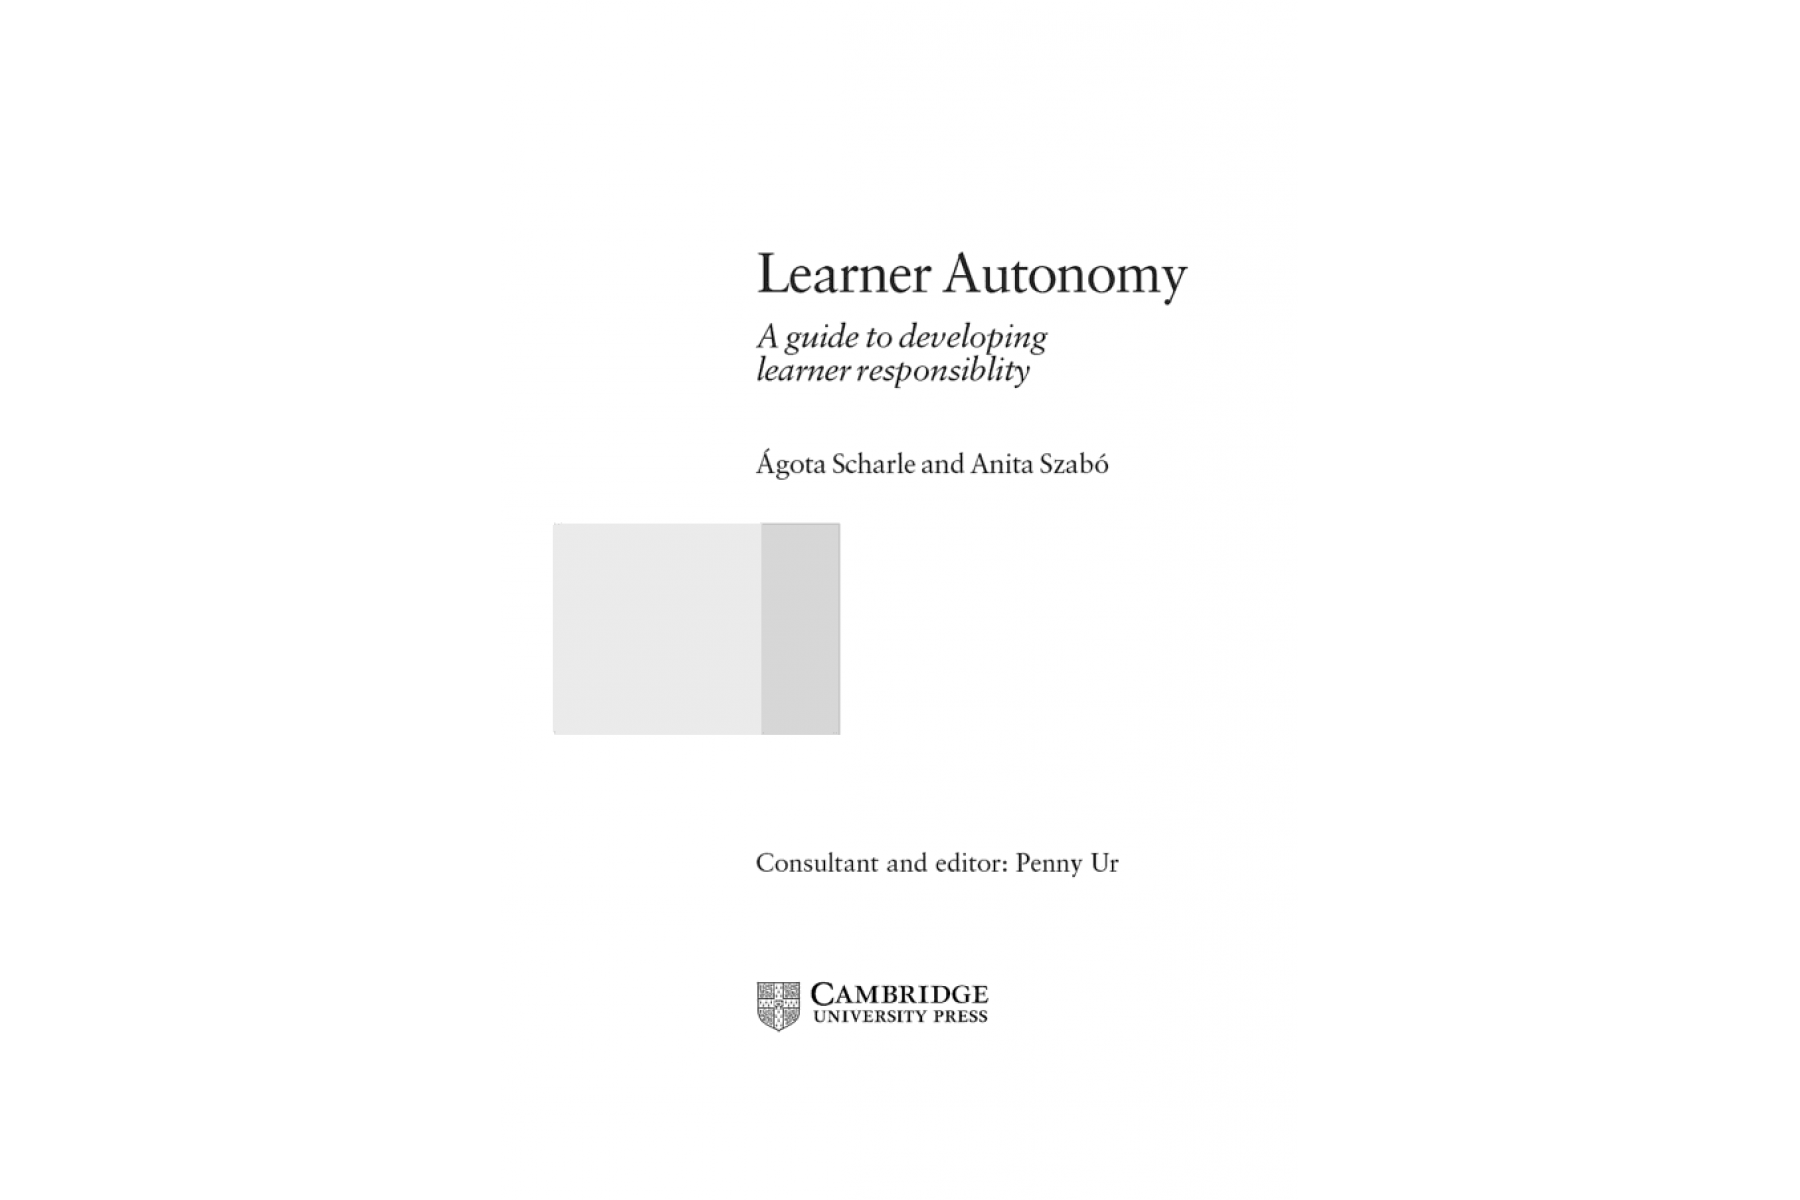 Learner Autonomy: A Guide to Developing Learner Responsibility